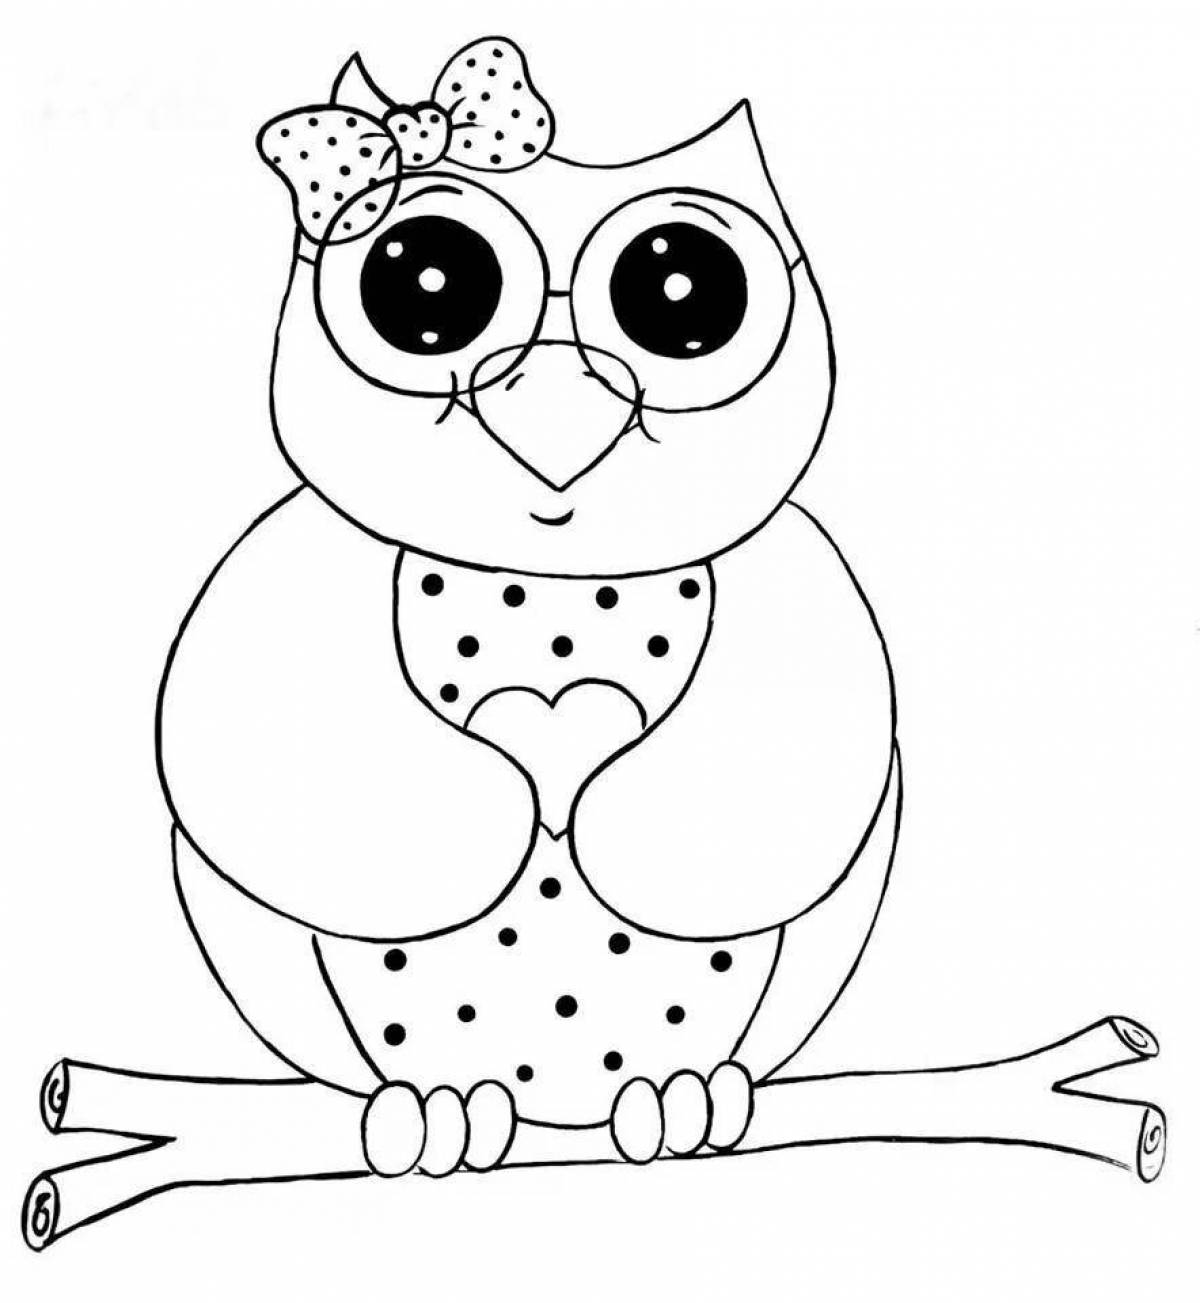 Fancy owl coloring for girls